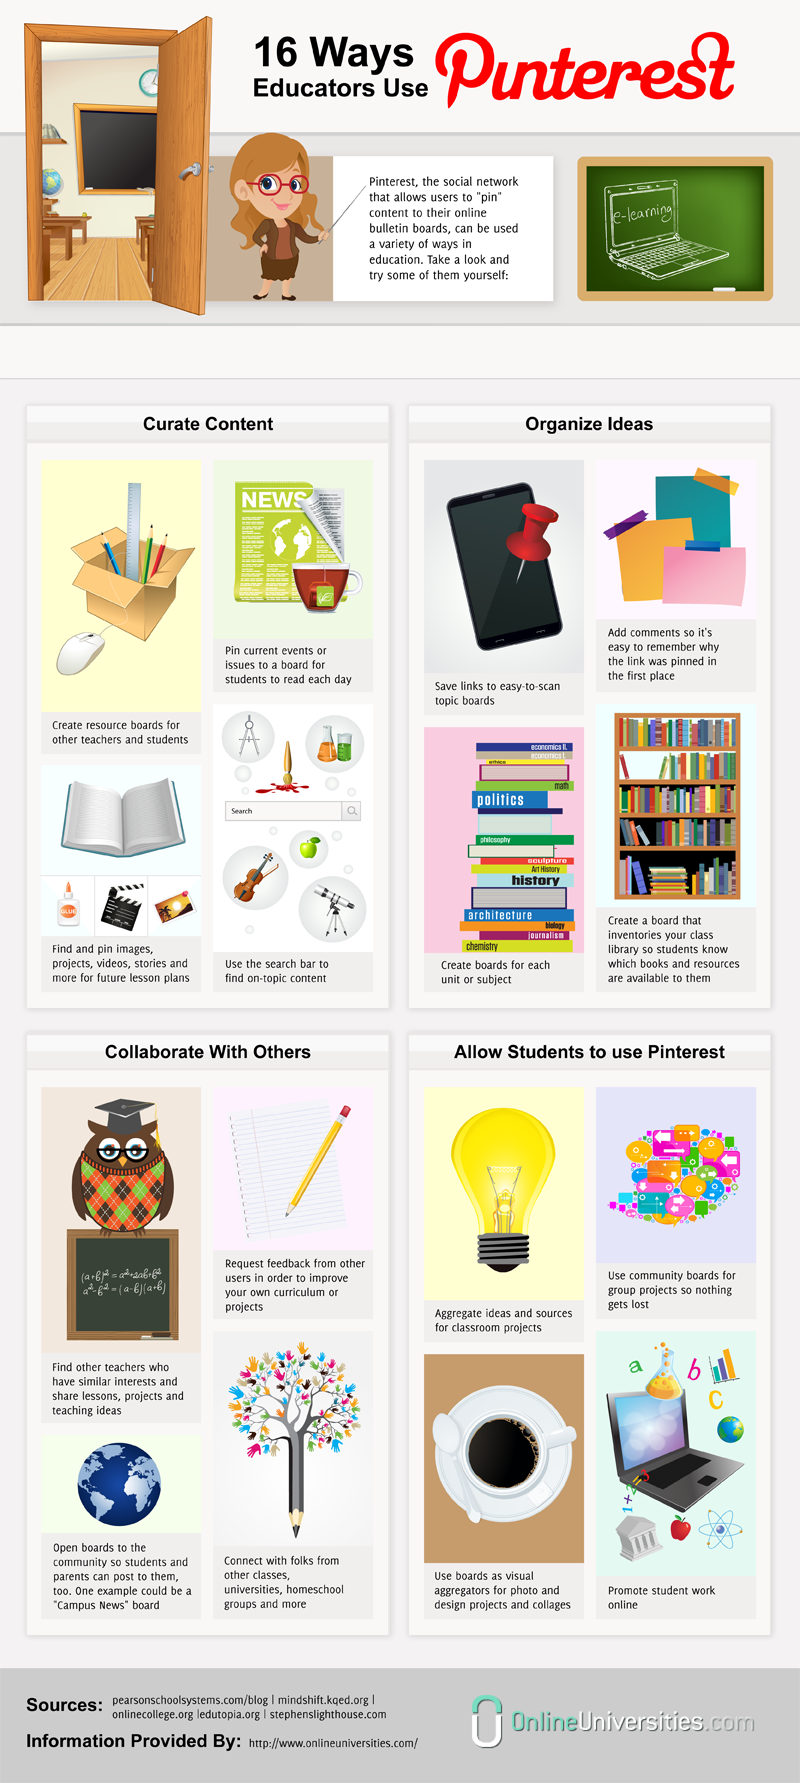 Pinterest and Education